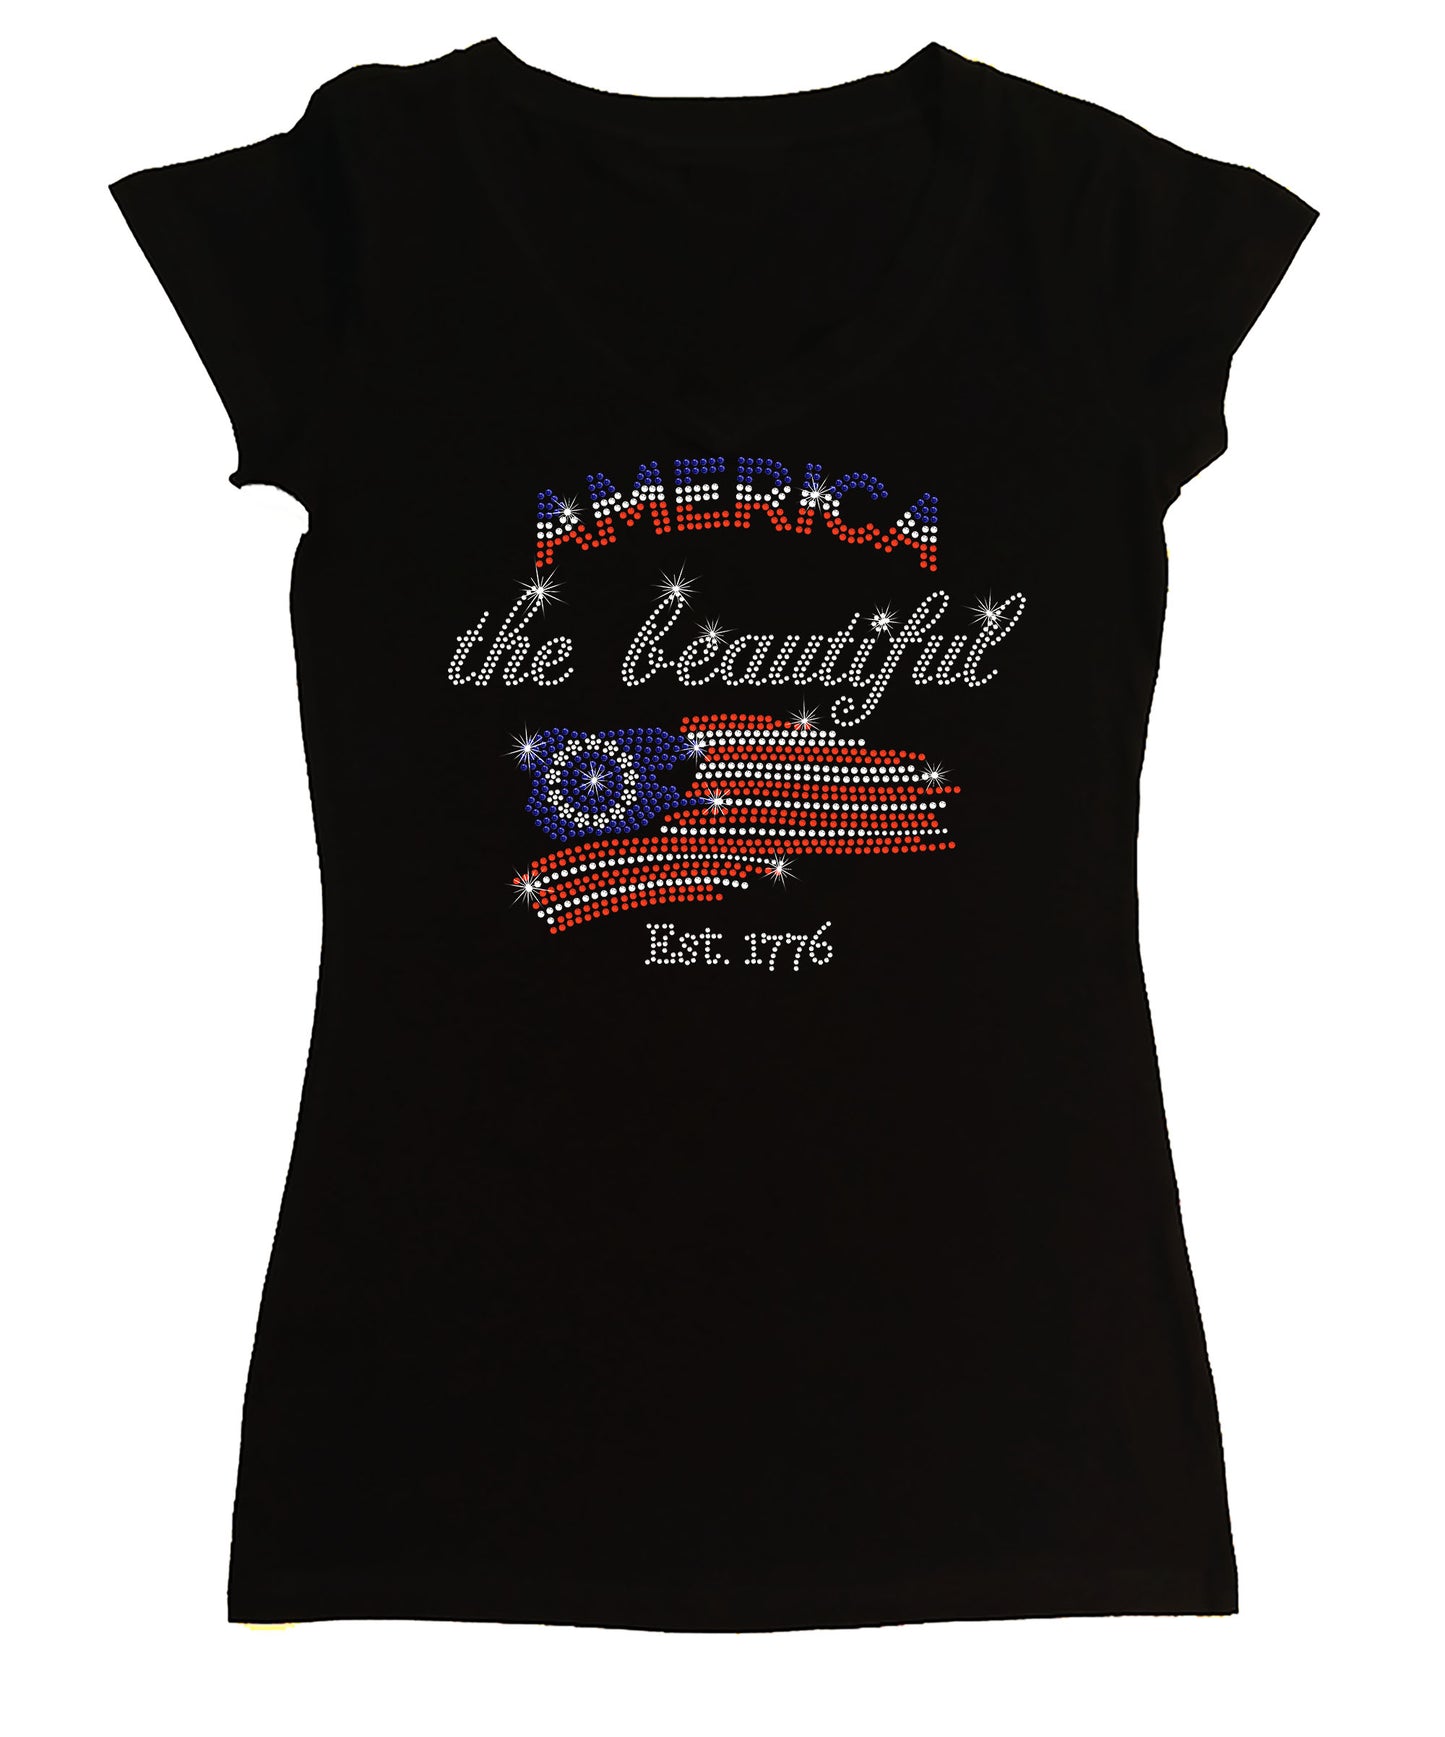 Women's Rhinestone Fitted Tight Snug America The Beautiful - in Red, White & Blue, Patriotic Shirt, 4th of July Shirt